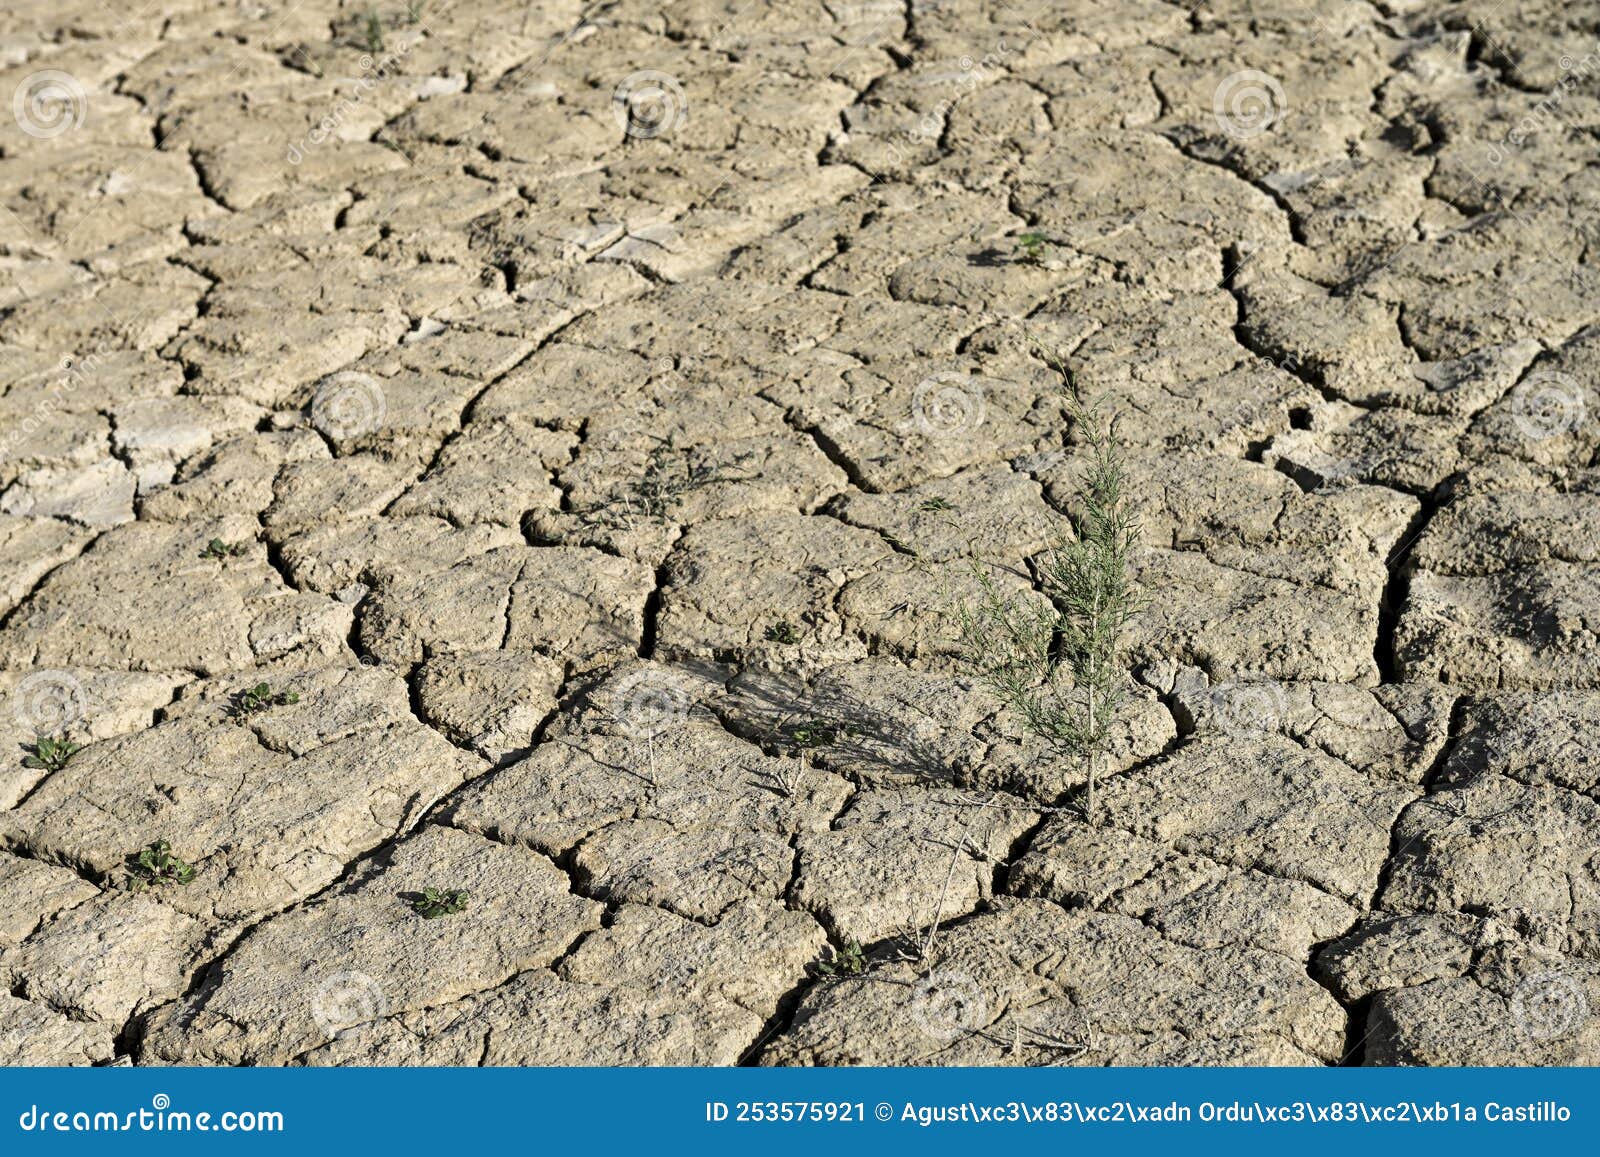 texture of dry land in southern europe. global warming and greenhouse effect.